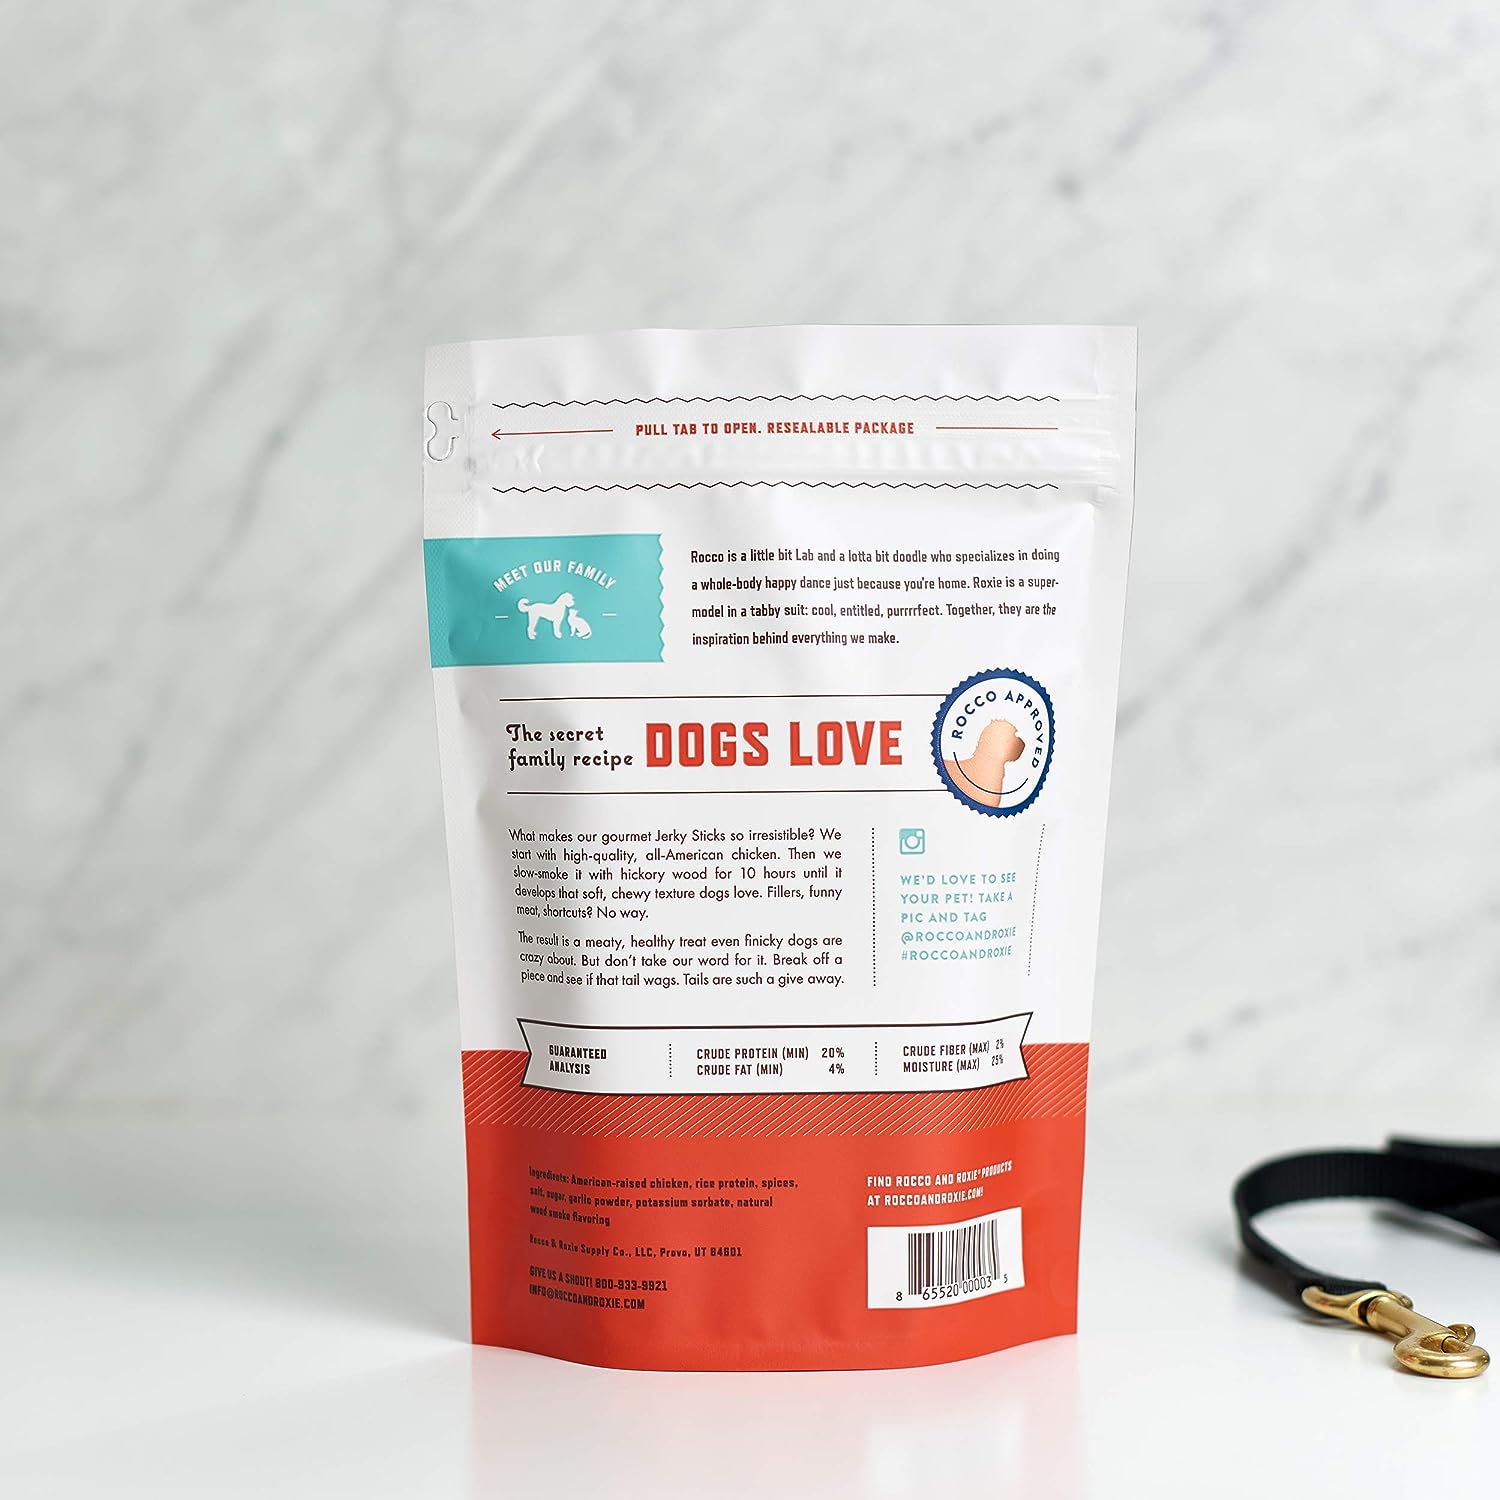 Wholesale prices with free shipping all over United States Rocco & Roxie Jerky Dog Treats Made in USA Healthy Treats for Potty Training High Value Real Meat Slow Roasted Snacks for Small, Medium & Large Dogs & Puppies Soft Chews, 1 Pound (Pack of 1) - Steven Deals